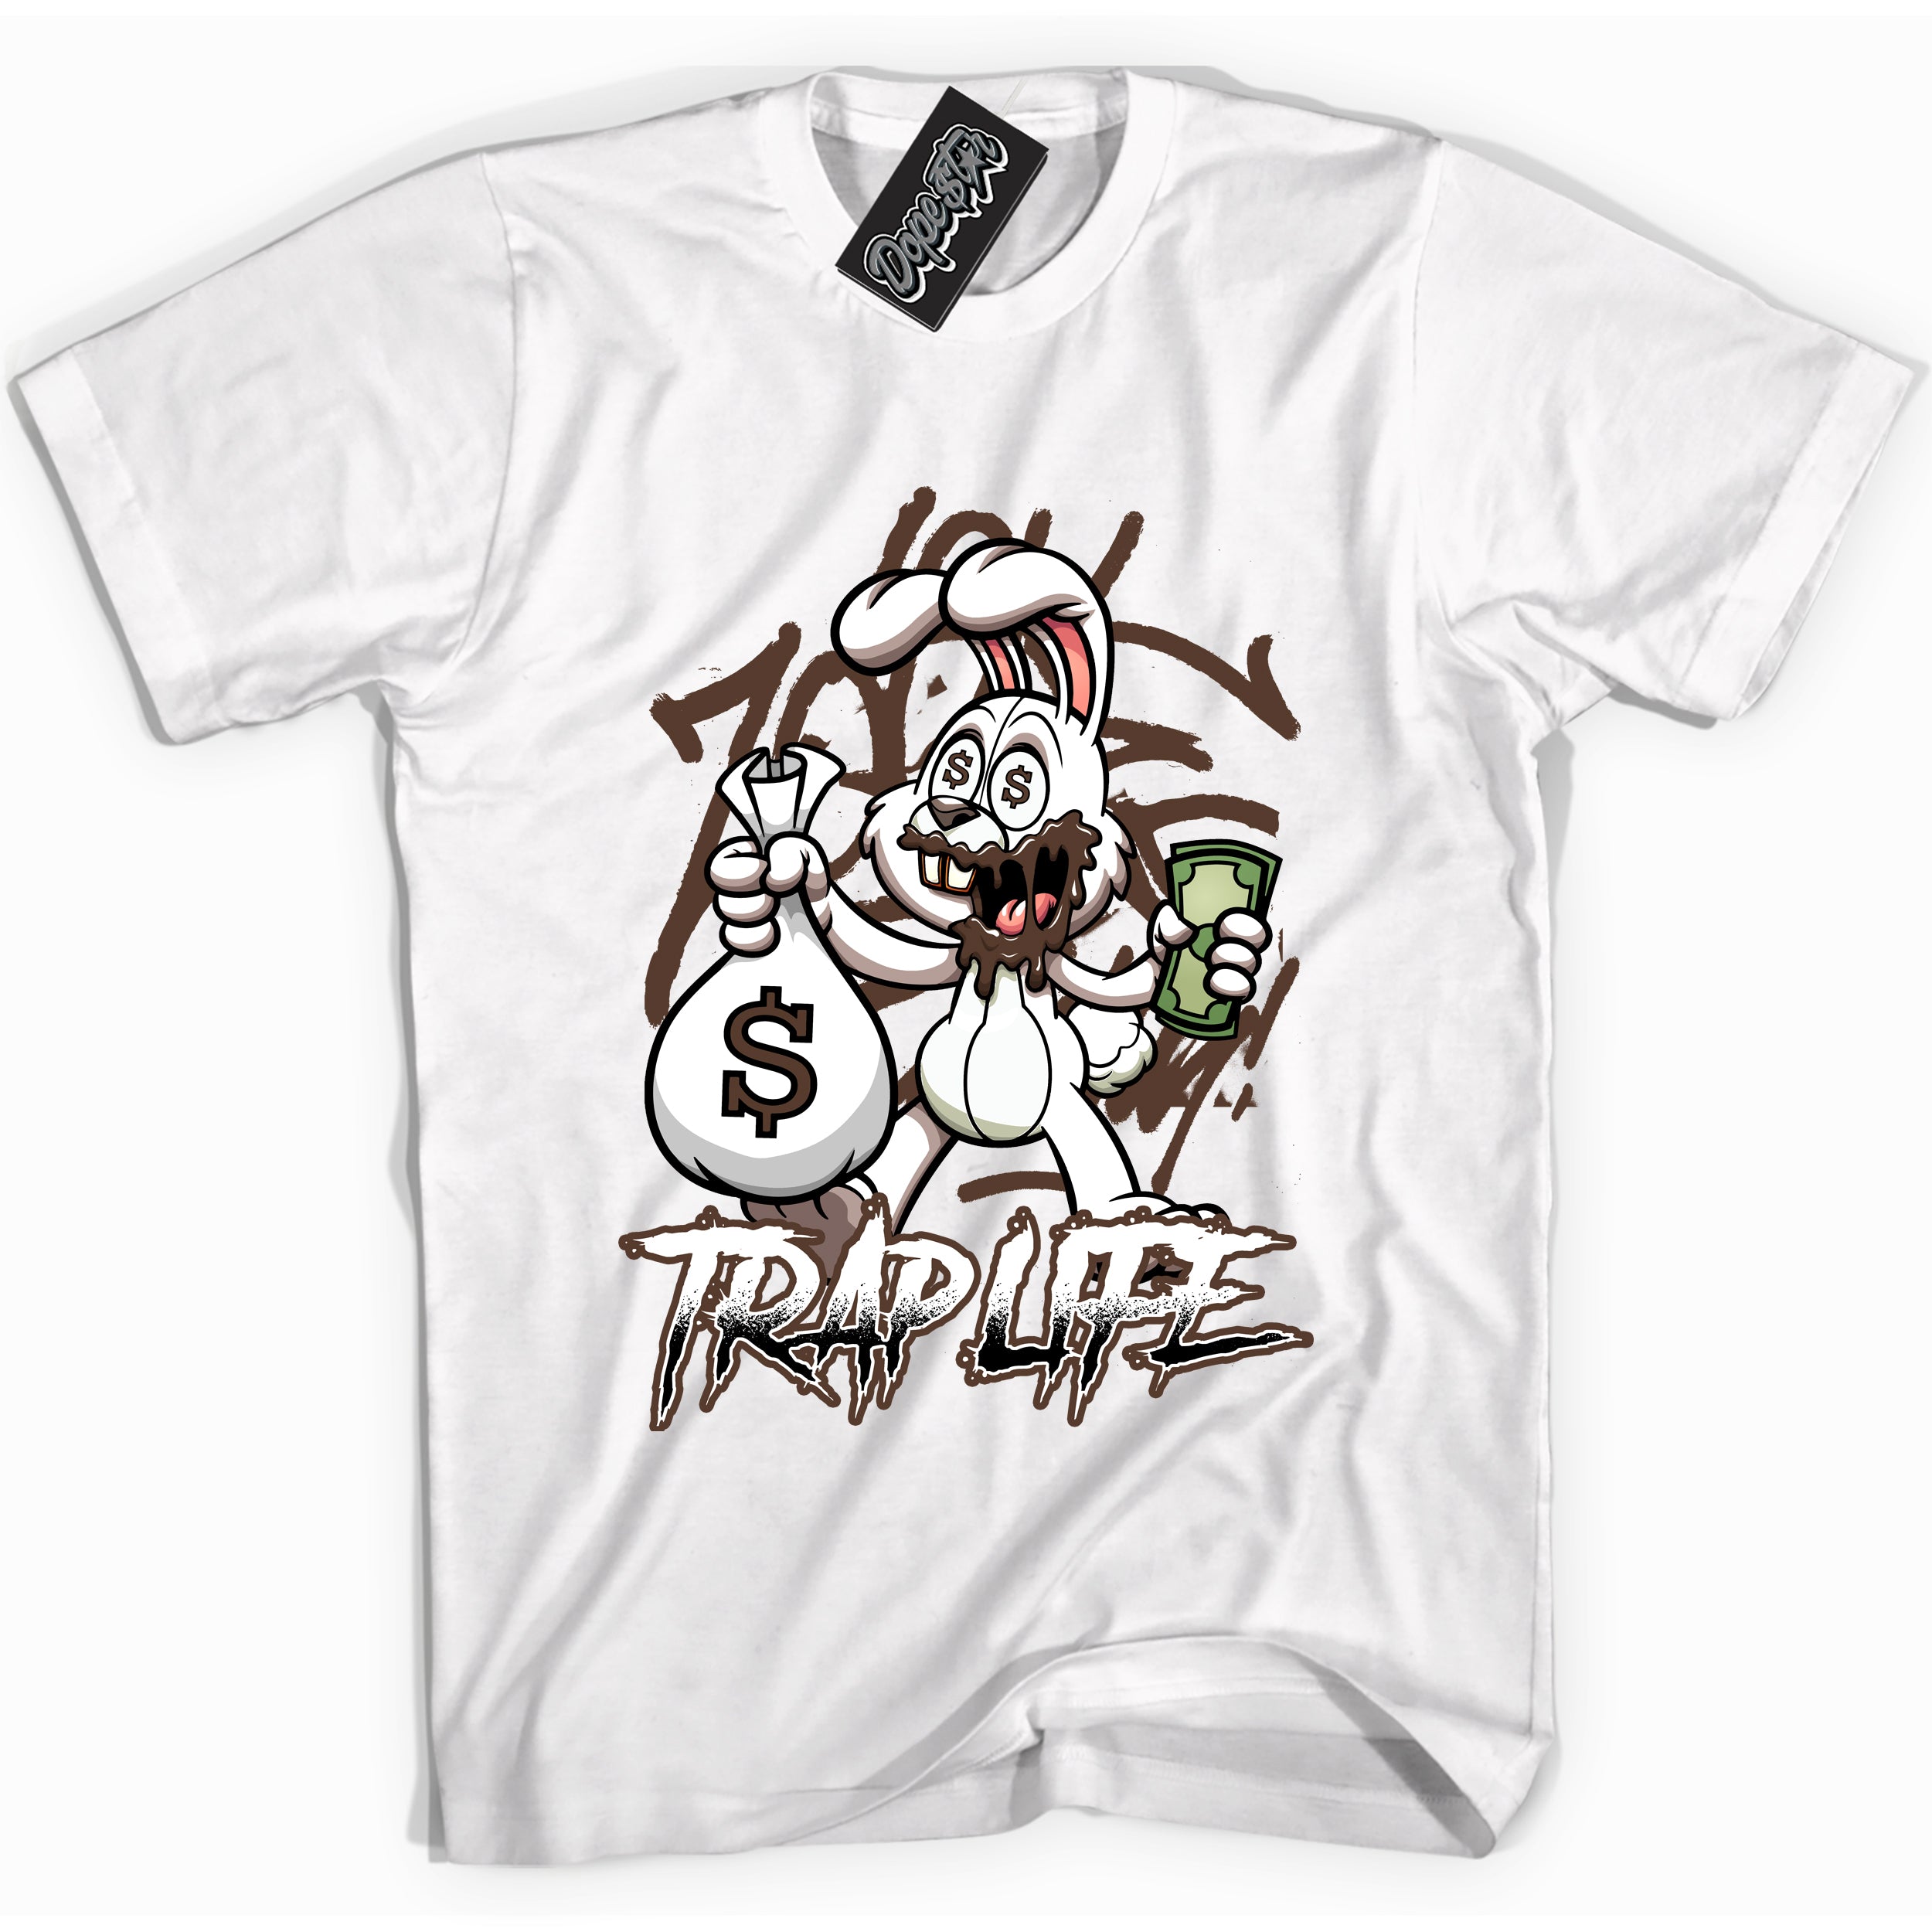 Cool White graphic tee with “ Trap Rabbit ” design, that perfectly matches Palomino 1s sneakers 